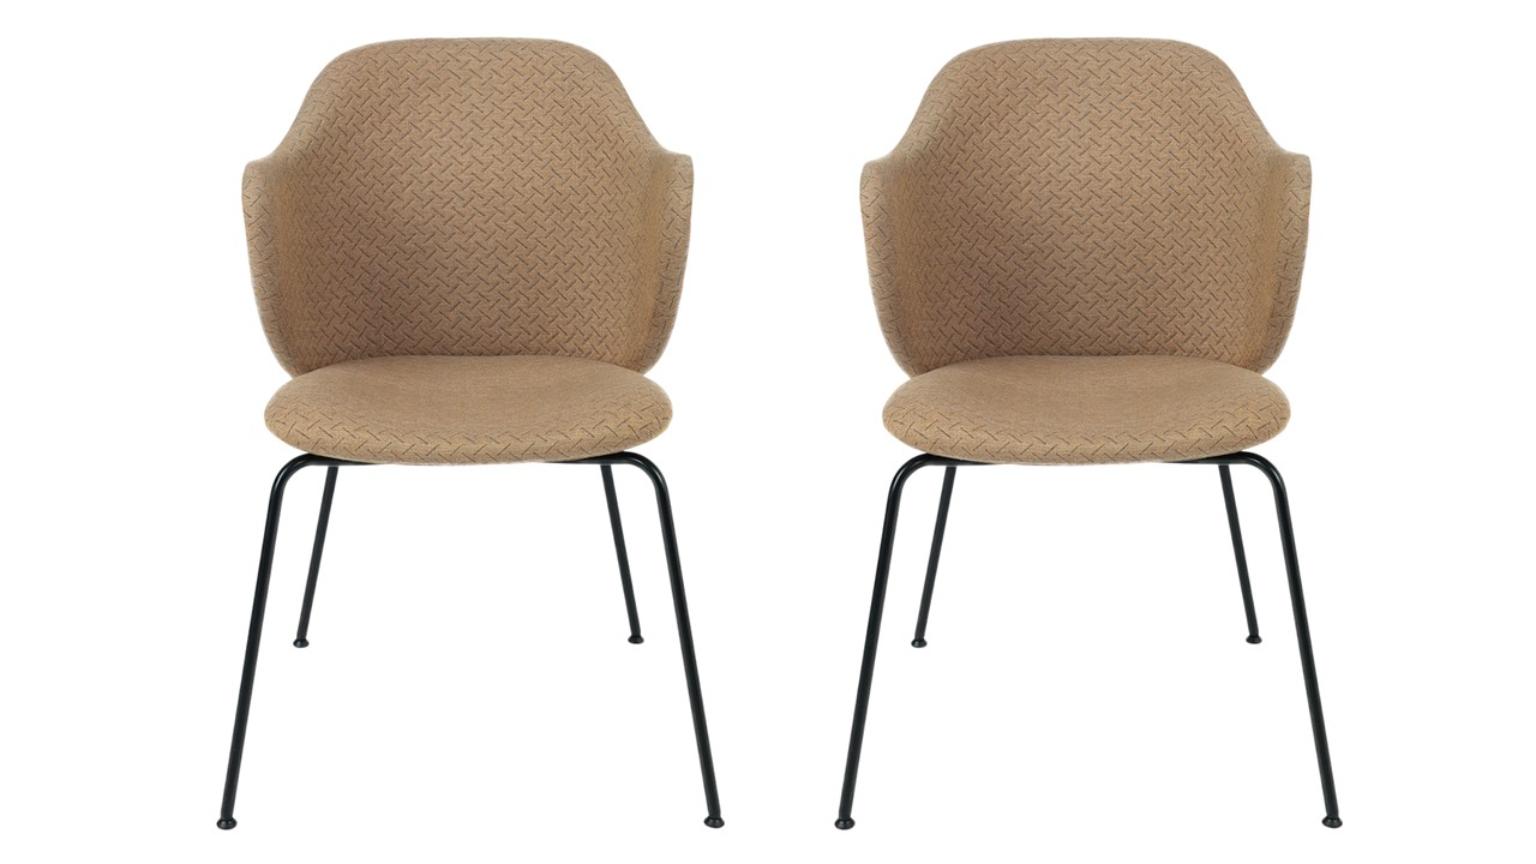 Set of 2 Brown Jupiter Lassen chairs by Lassen
Dimensions: W 58 x D 60 x H 88 cm 
Materials: Textile

The Lassen Chair by Flemming Lassen, Magnus Sangild and Marianne Viktor was launched in 2018 as an ode to Flemming Lassen’s uncompromising